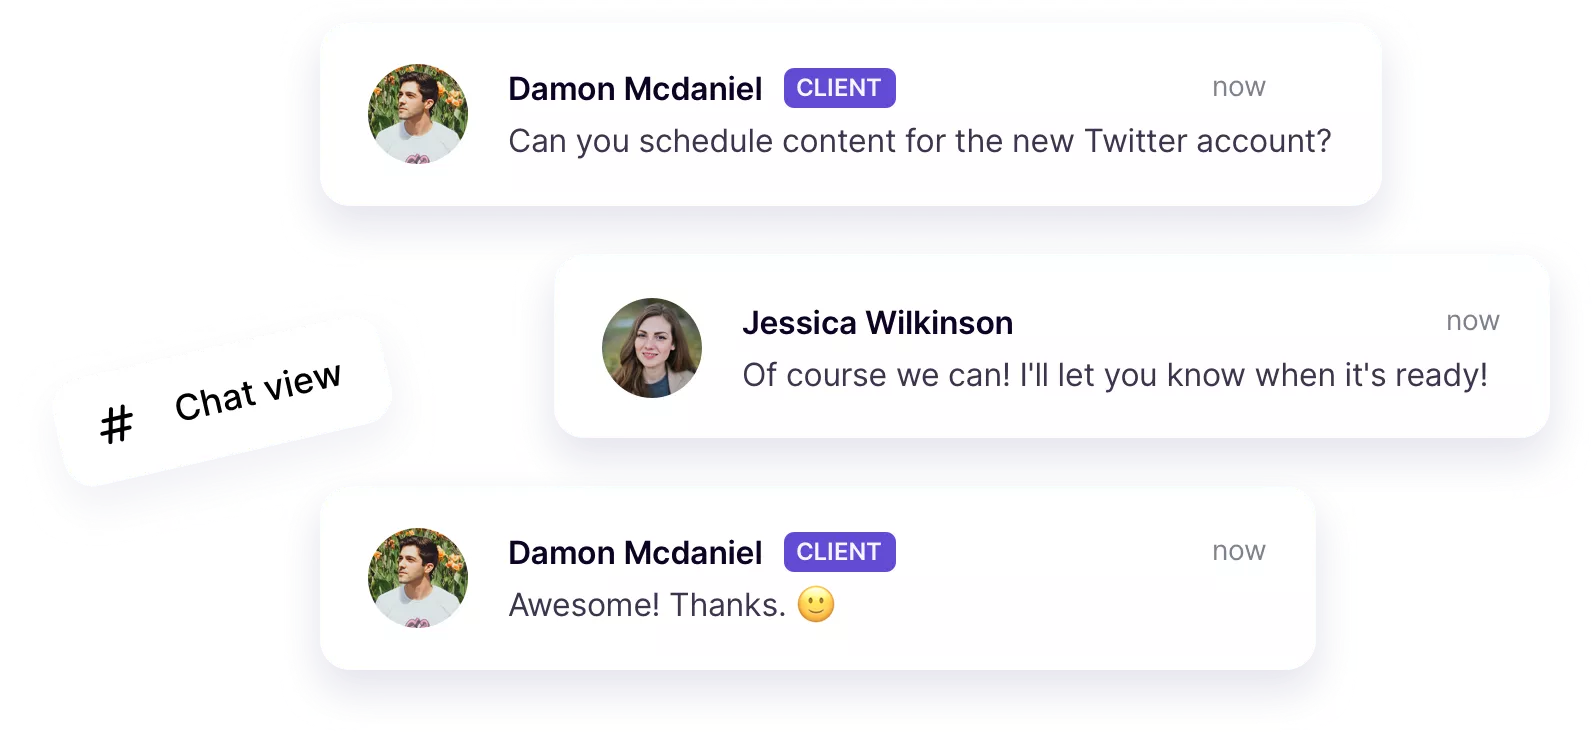 Social media scheduler - chat view